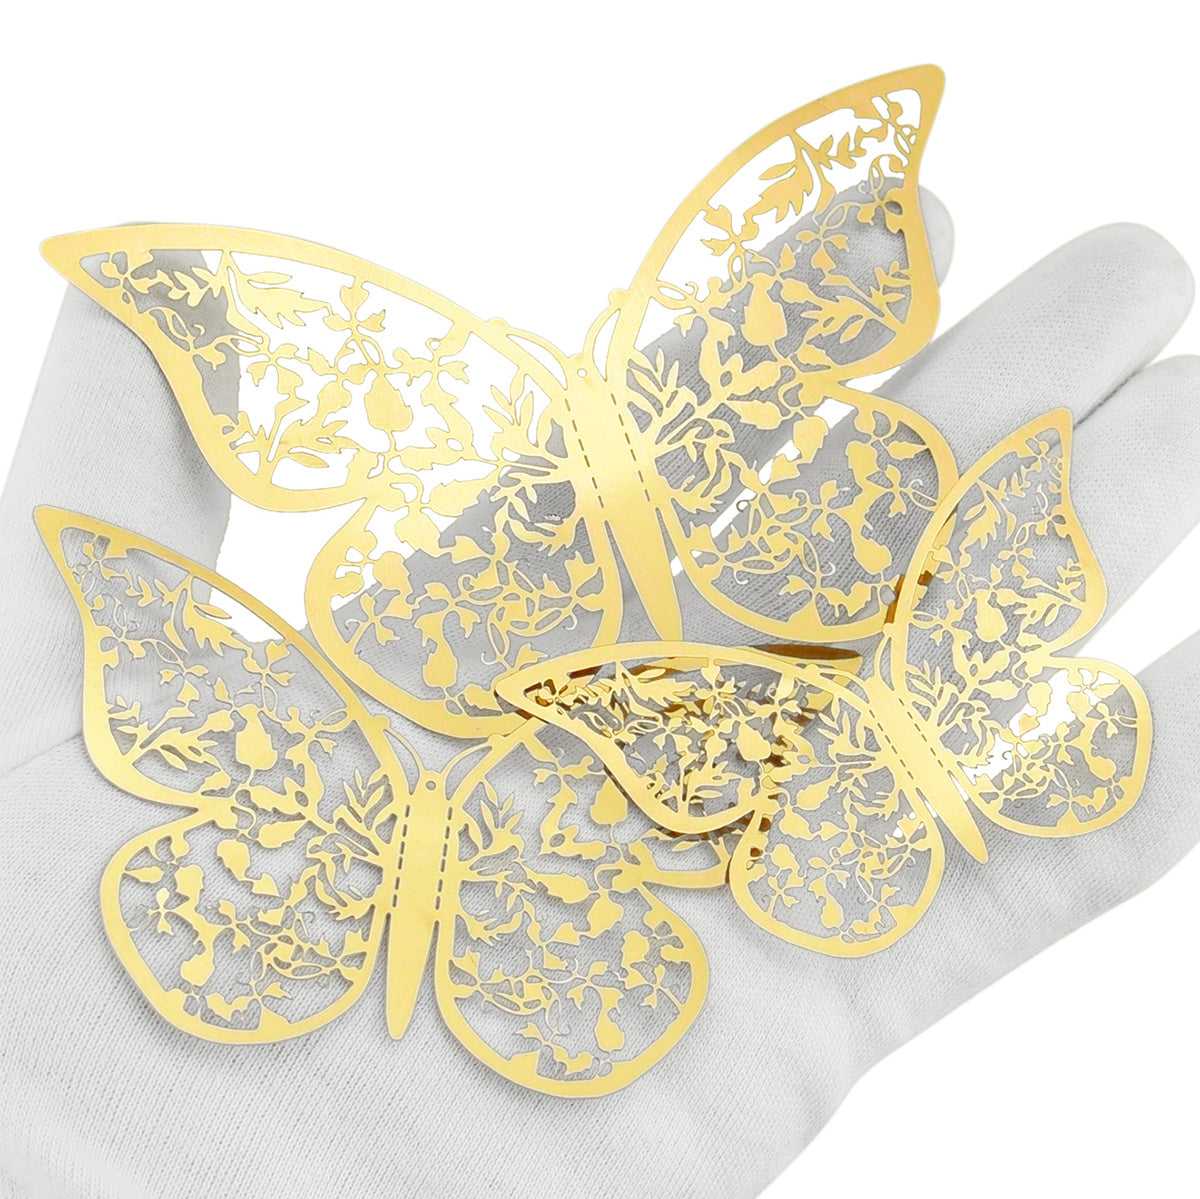 Gold Butterflies Wall Decorations Set - Floral & Leaves Hollow Design